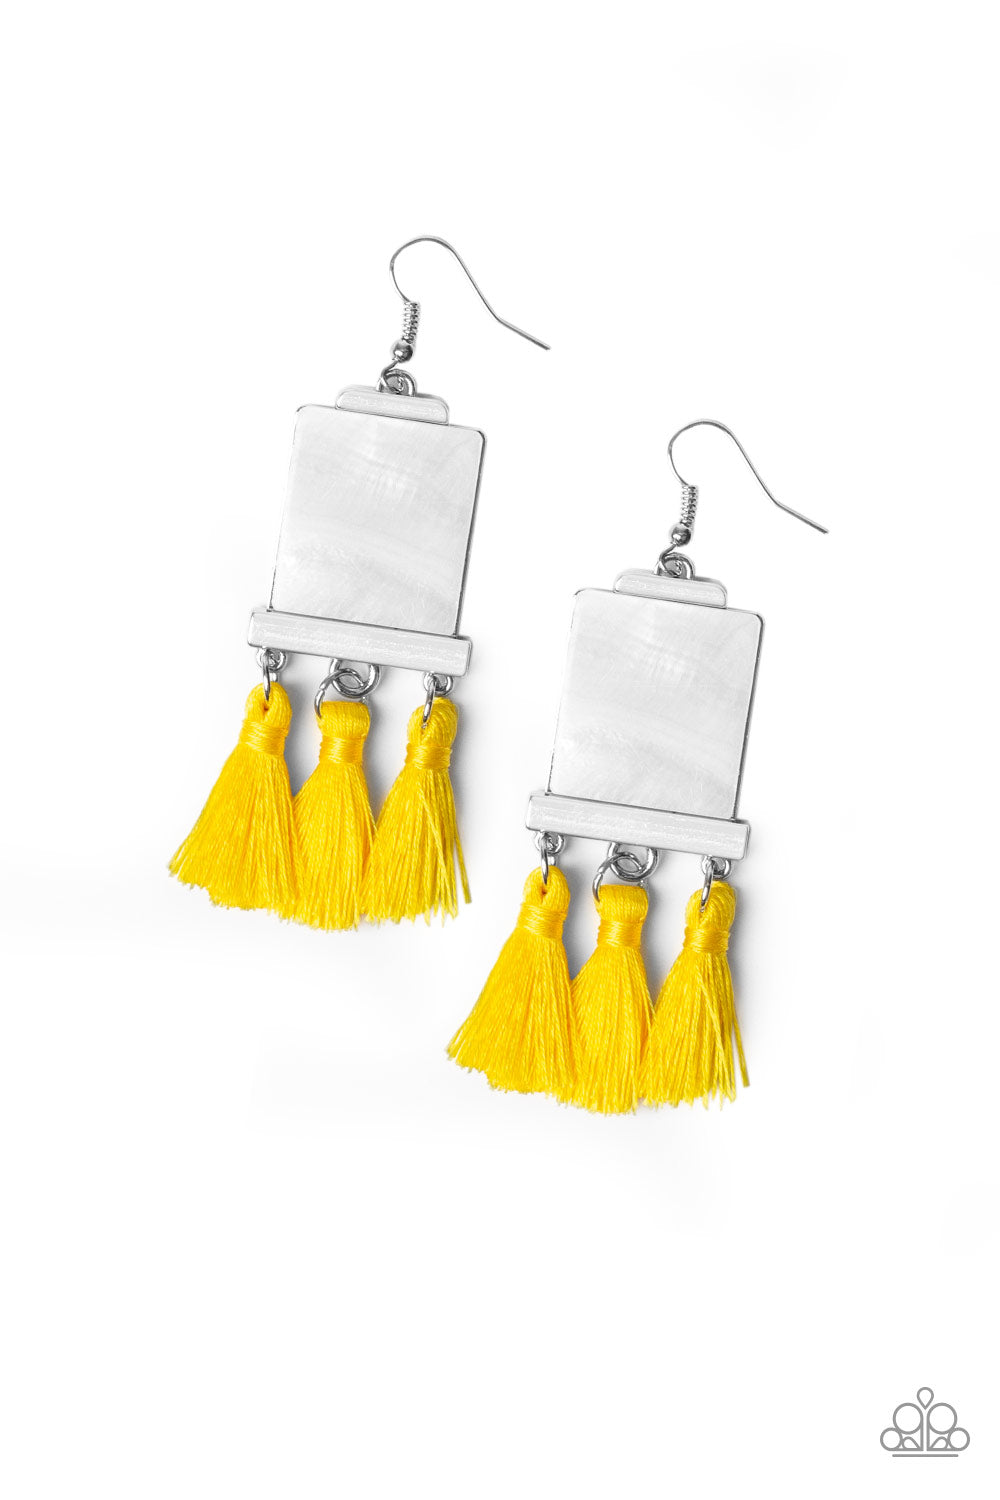 Amazon.com: comfortlying Dangling Earrings for Women Tassel Sector Metal  Simple Statement Fashion Gifts Birthday (Color : Yellow) : Clothing, Shoes  & Jewelry